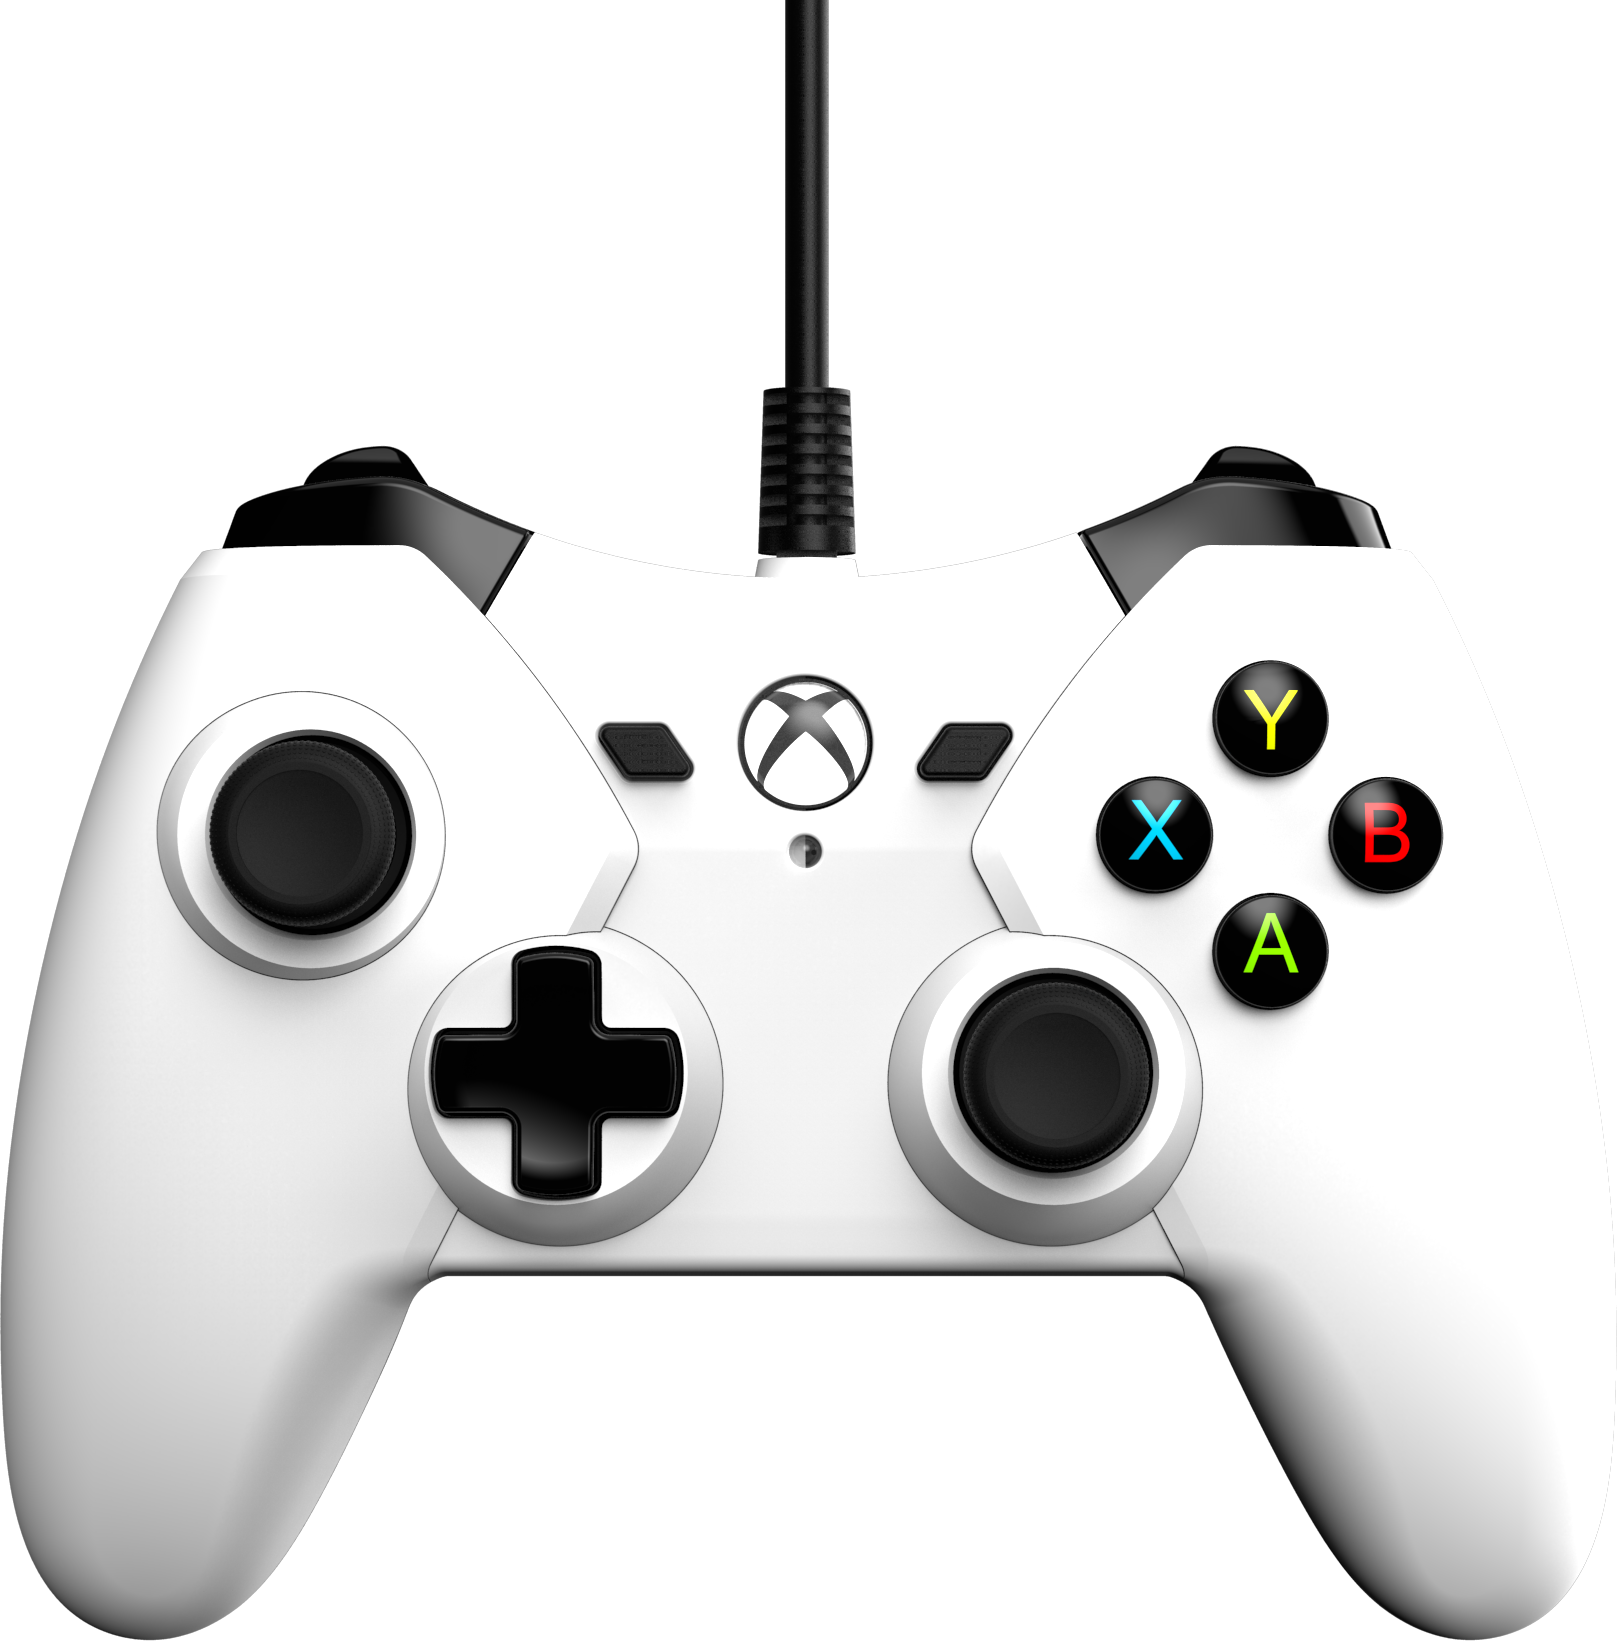 White Wired Controller For Xbox One Xbox One Gamestop